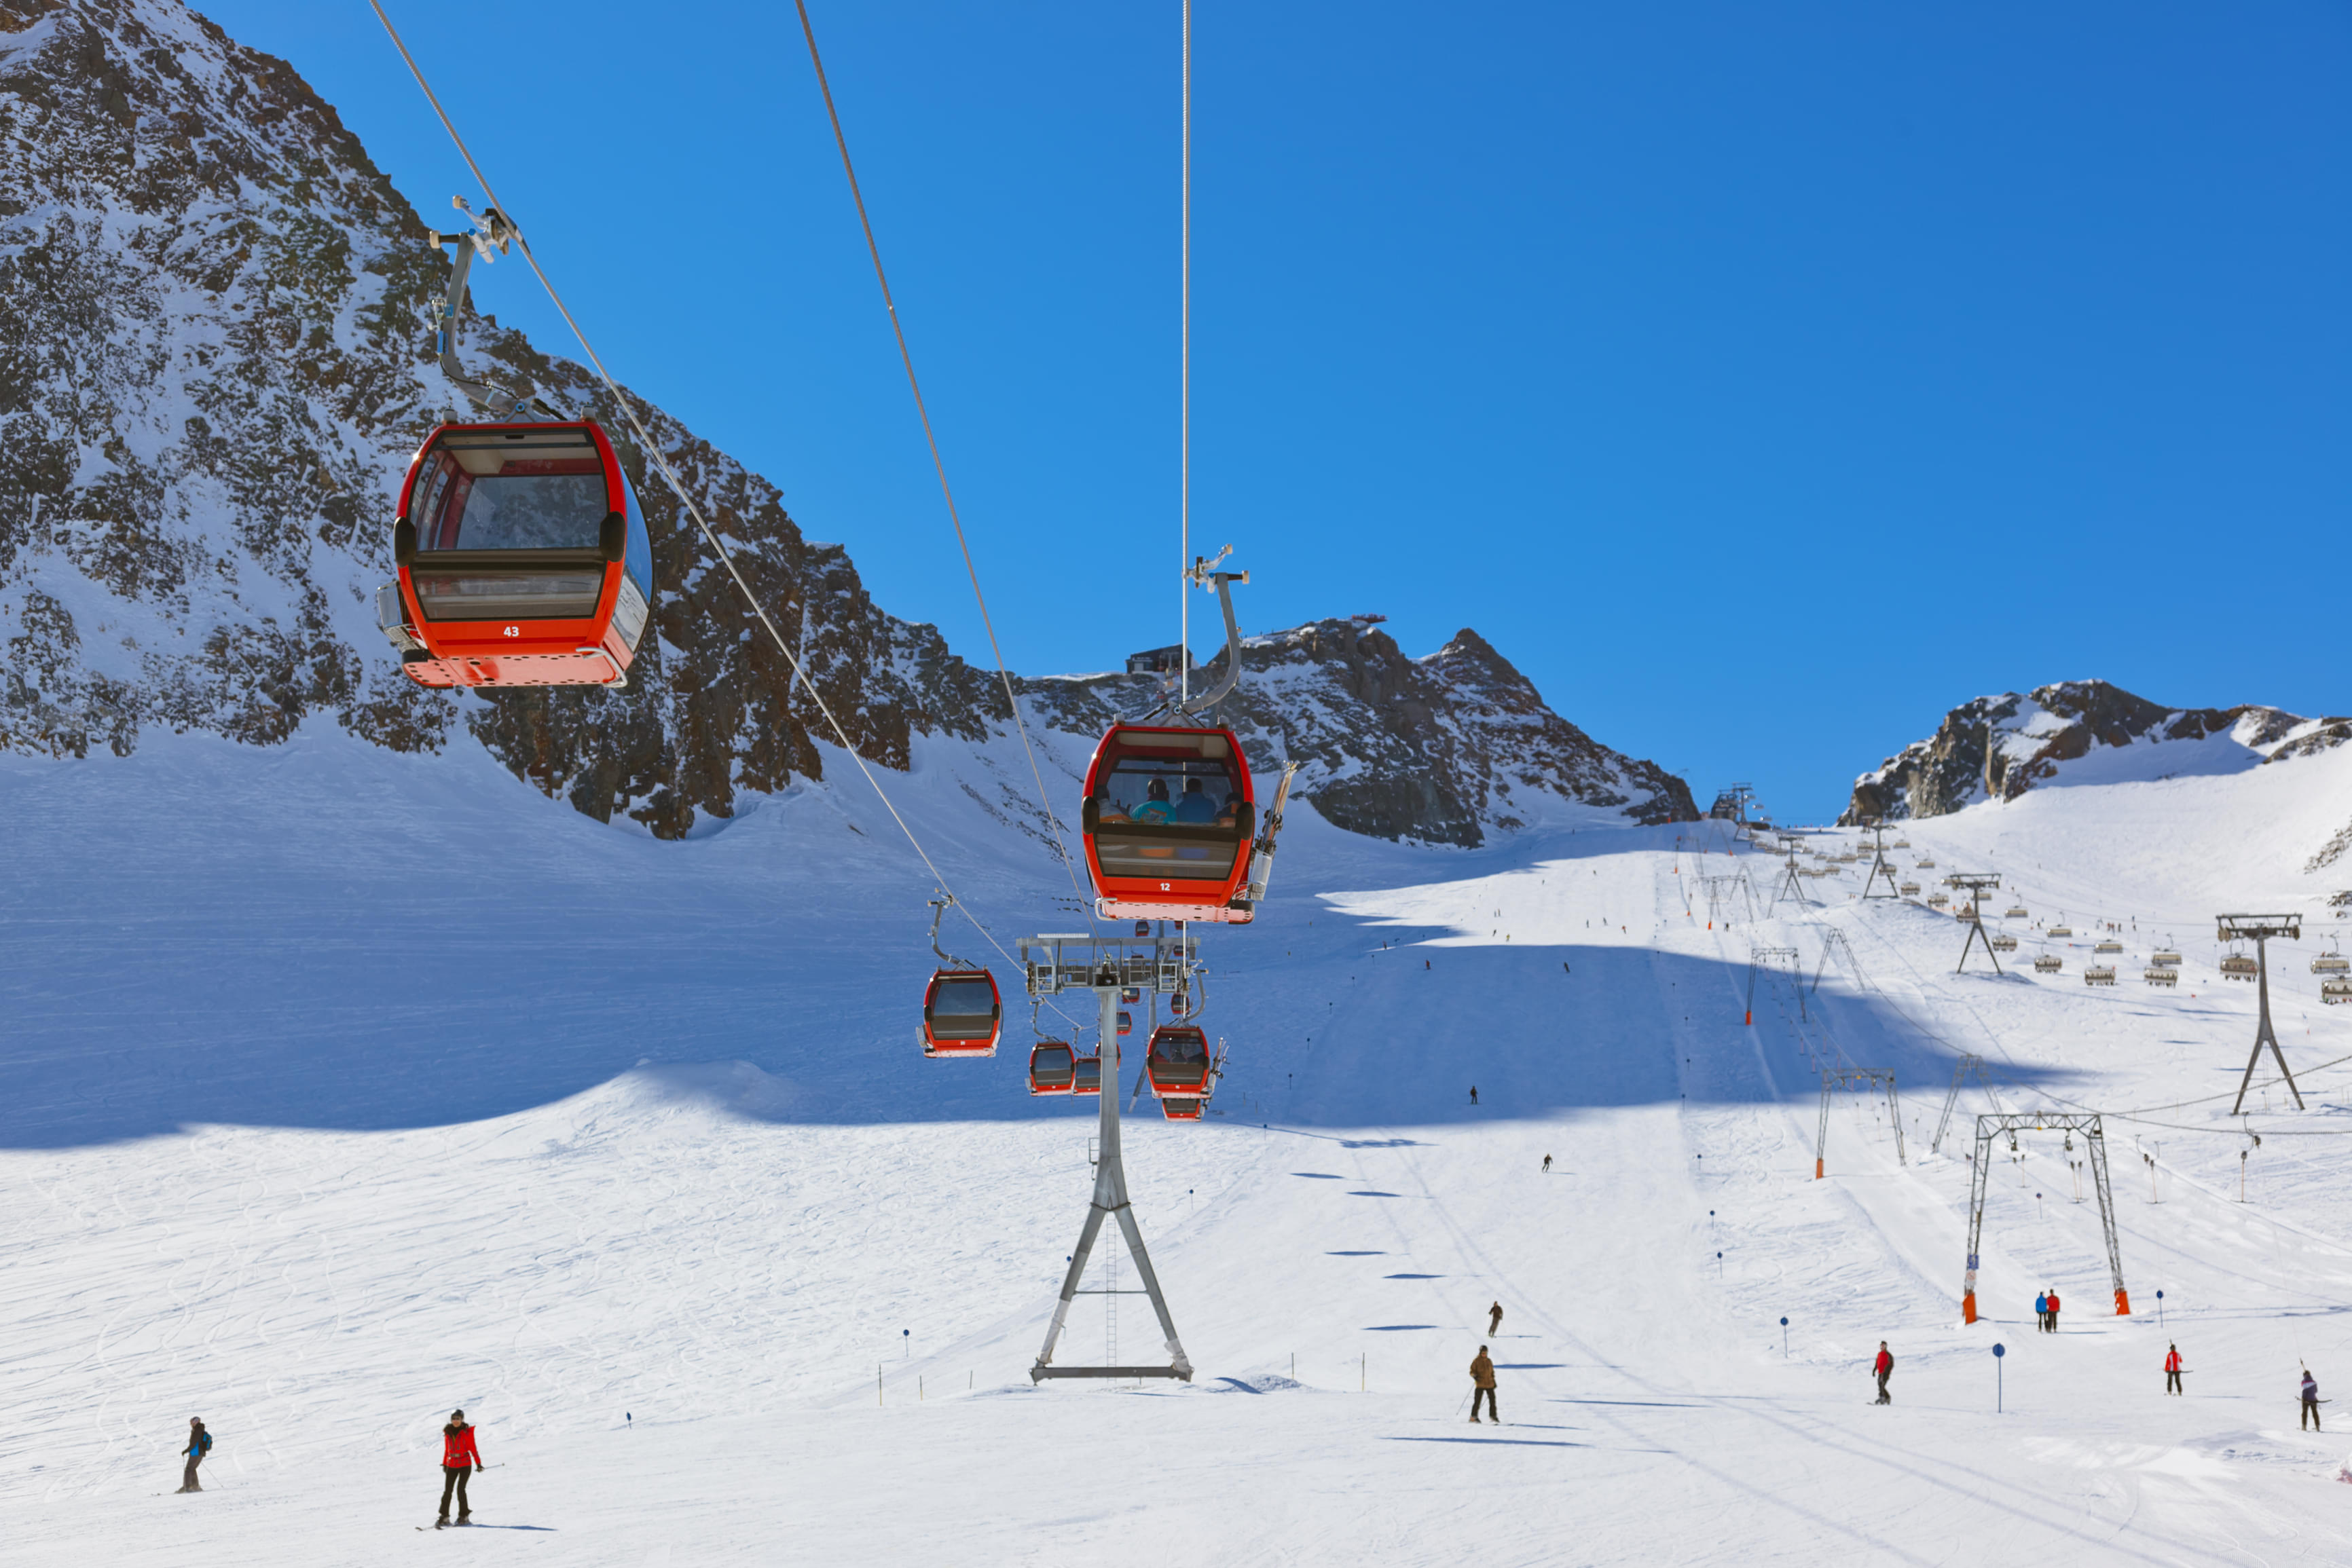 Innsbruck Packages from Gurgaon | Get Upto 50% Off